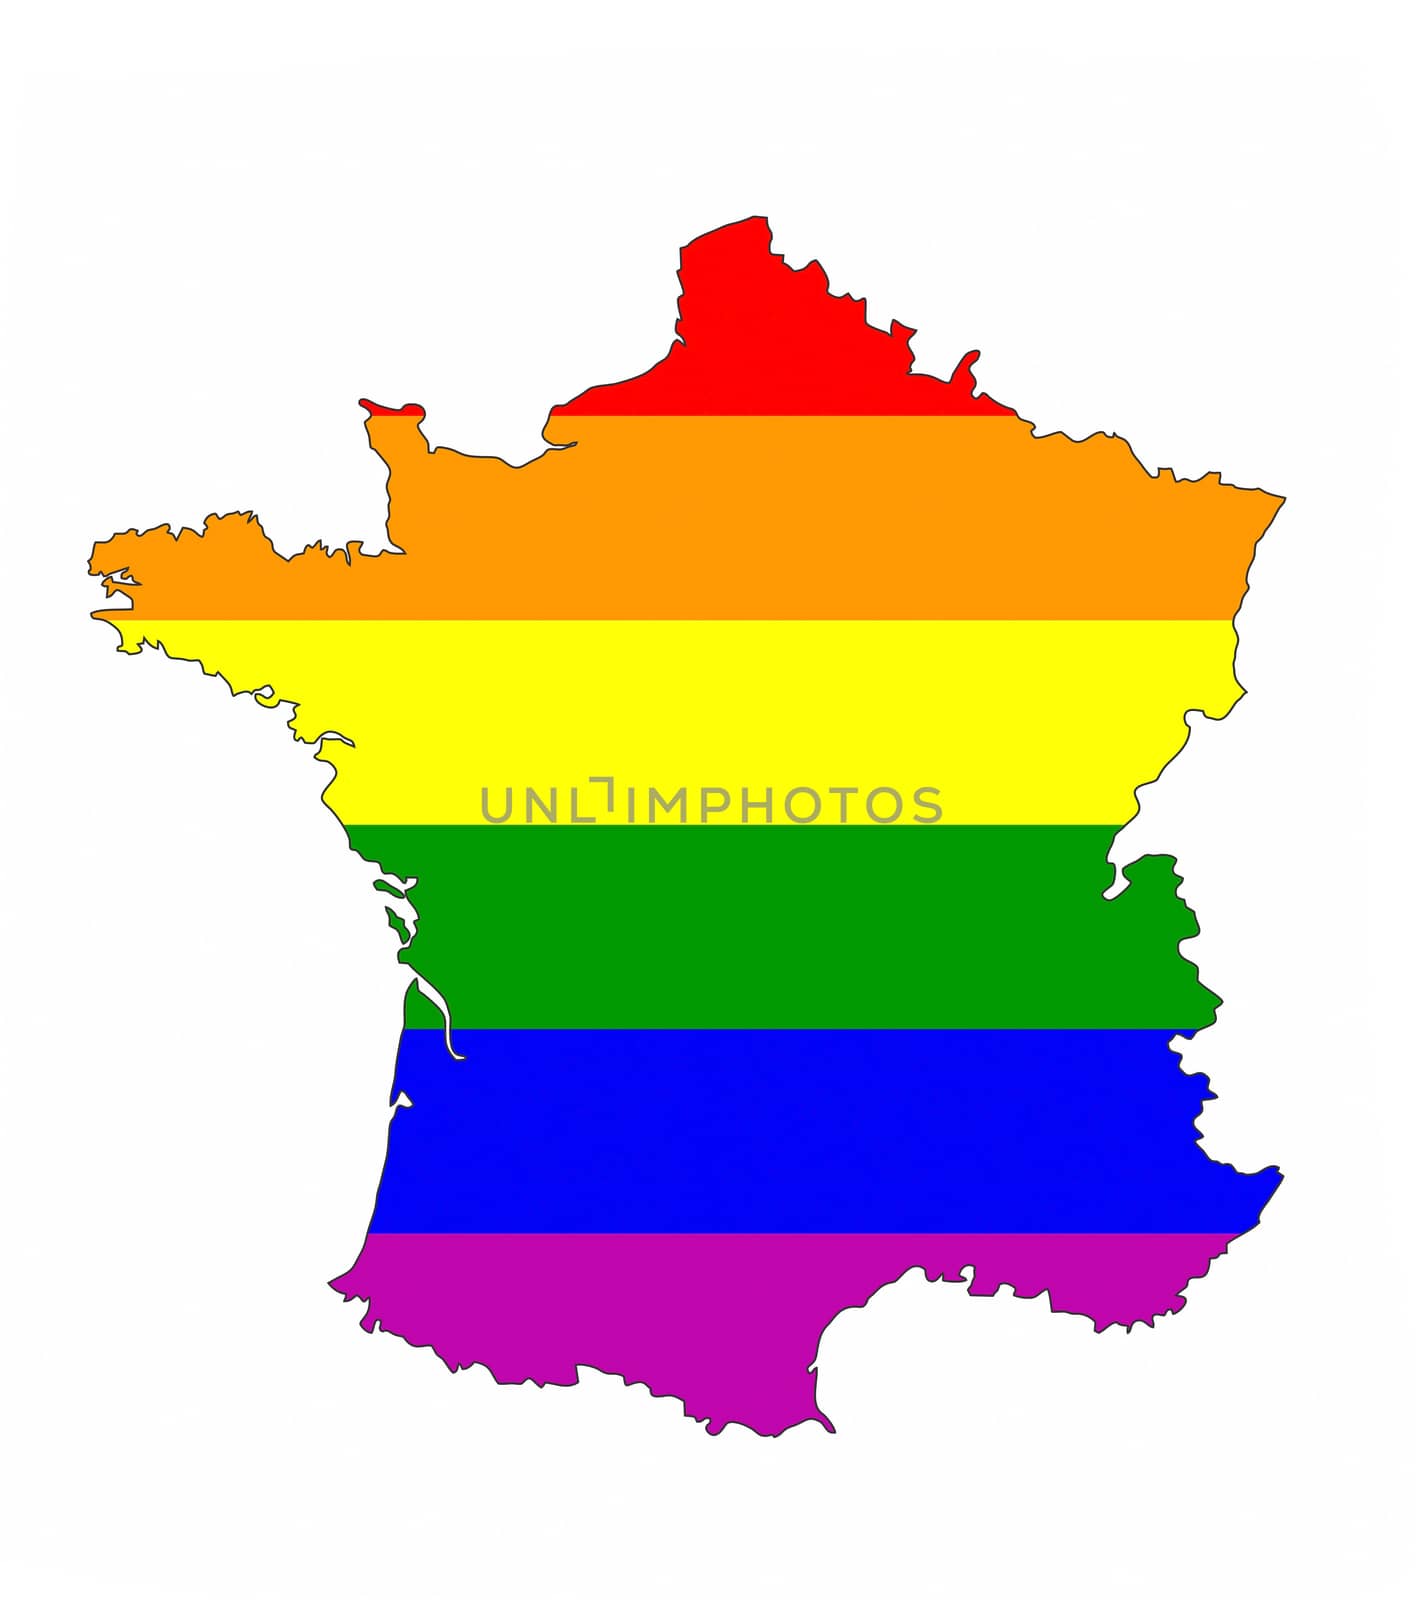 france country gay pride flag map shape 